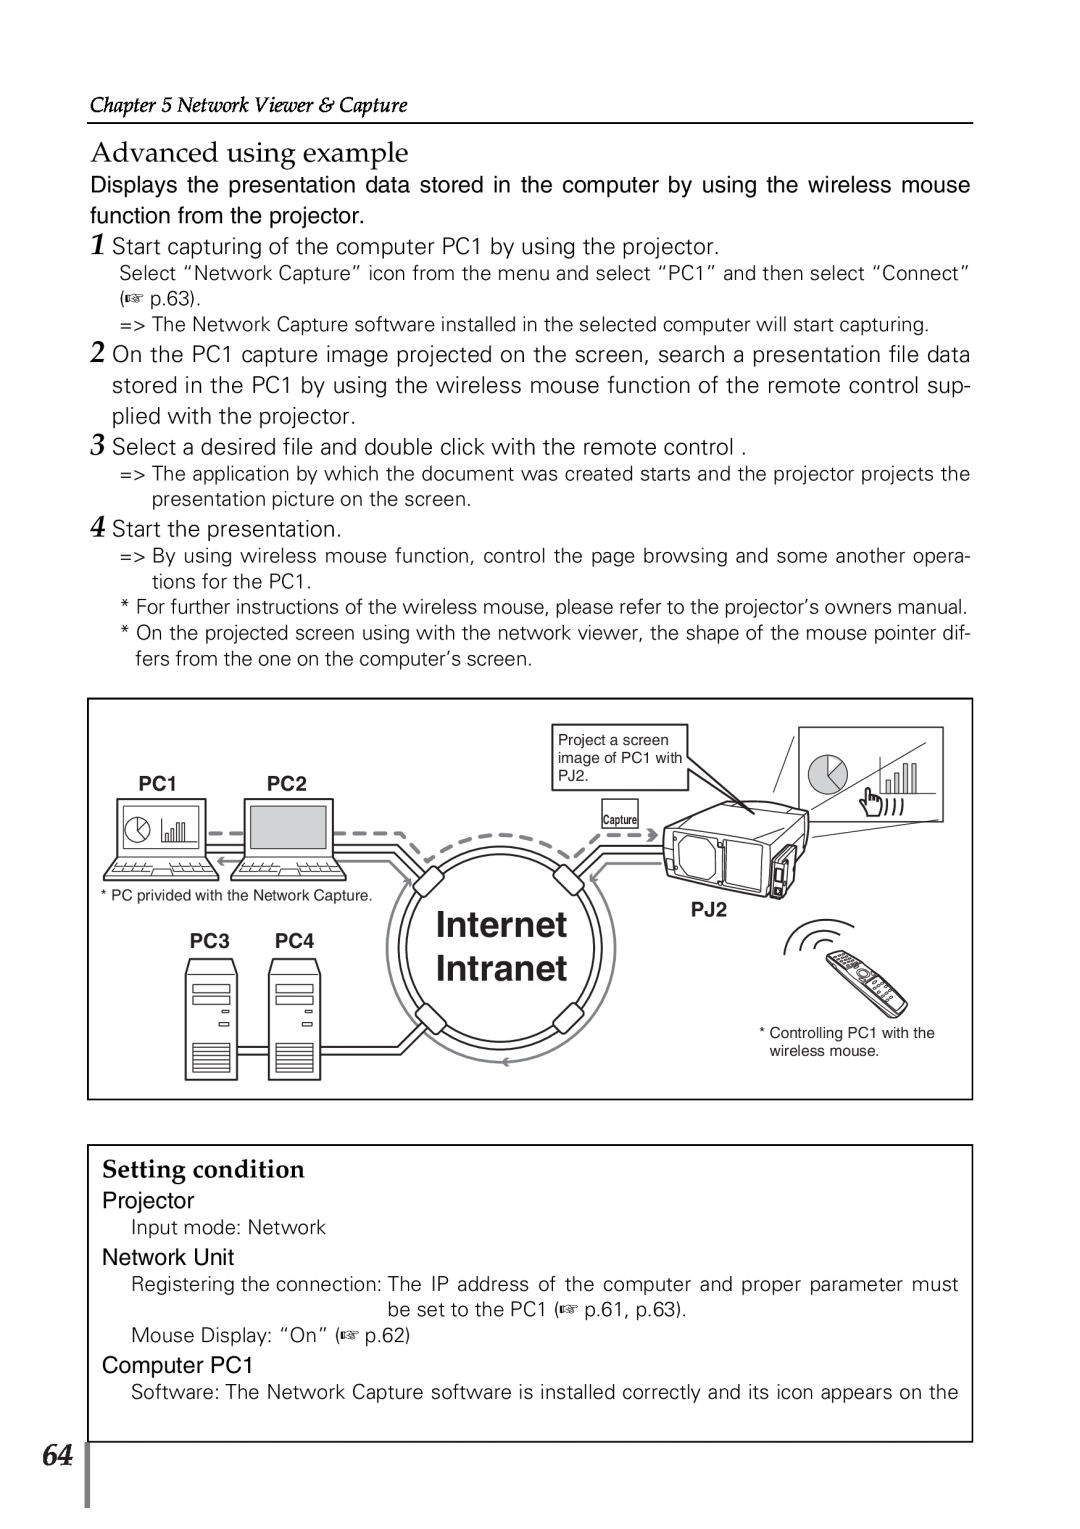 Sanyo POA-PN02 Internet Intranet, Advanced using example, Setting condition, Projector, Network Unit, Computer PC1 